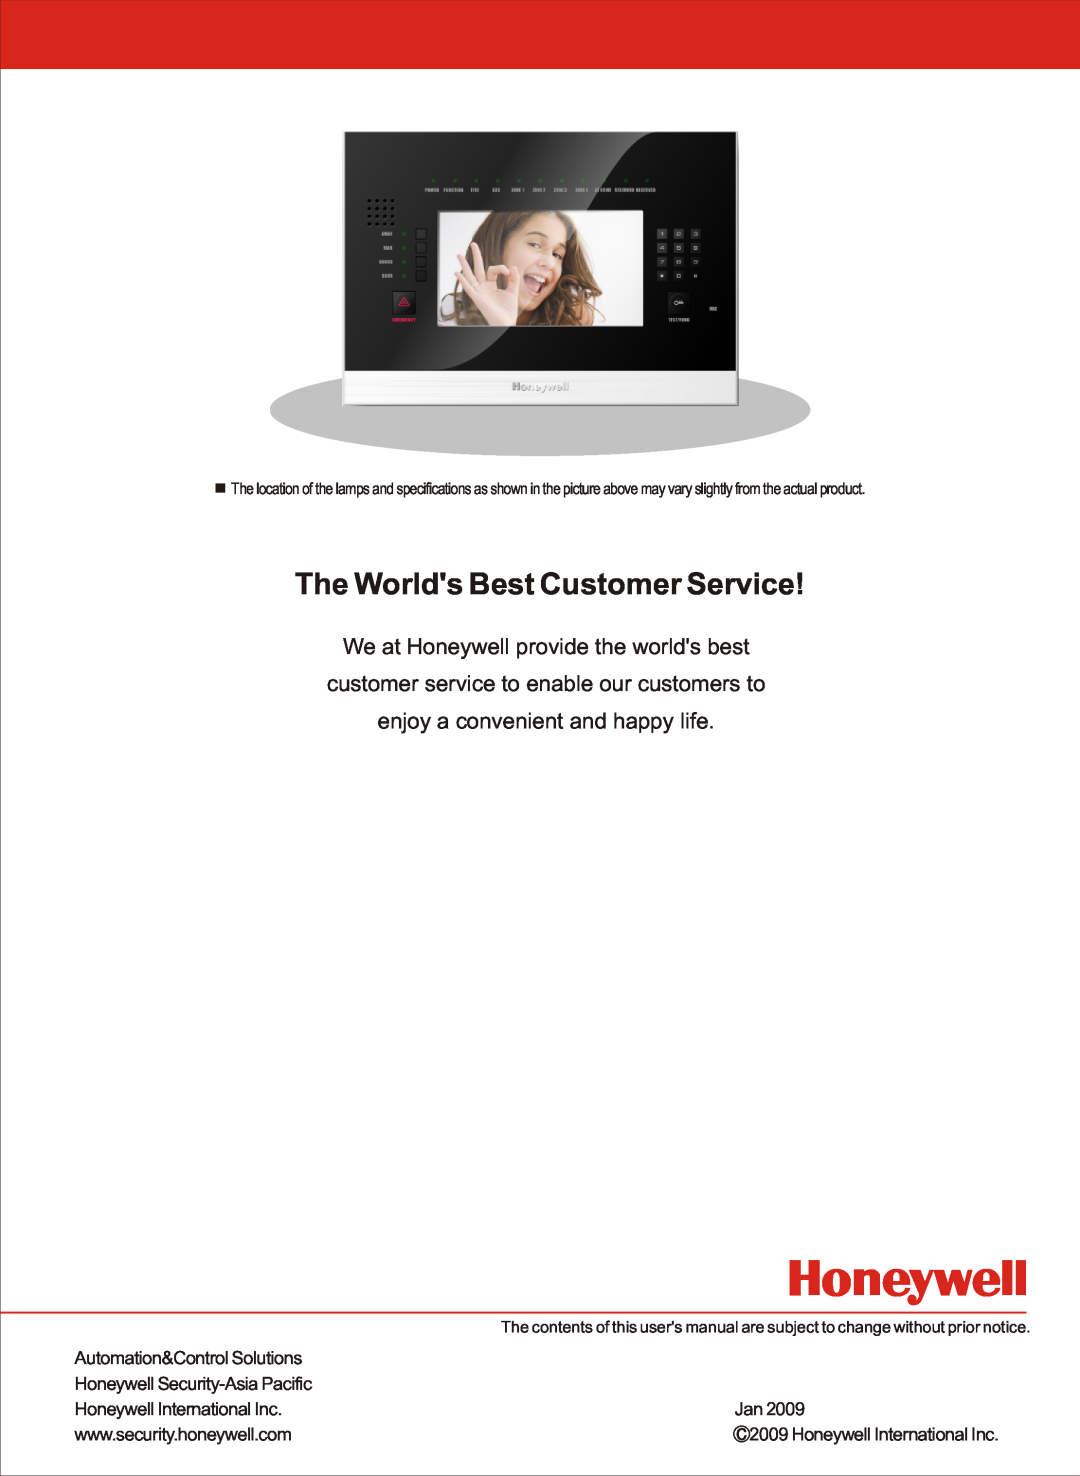 Honeywell HS-6270 The Worlds Best Customer Service, Automation&Control Solutions, Honeywell Security-AsiaPacific 